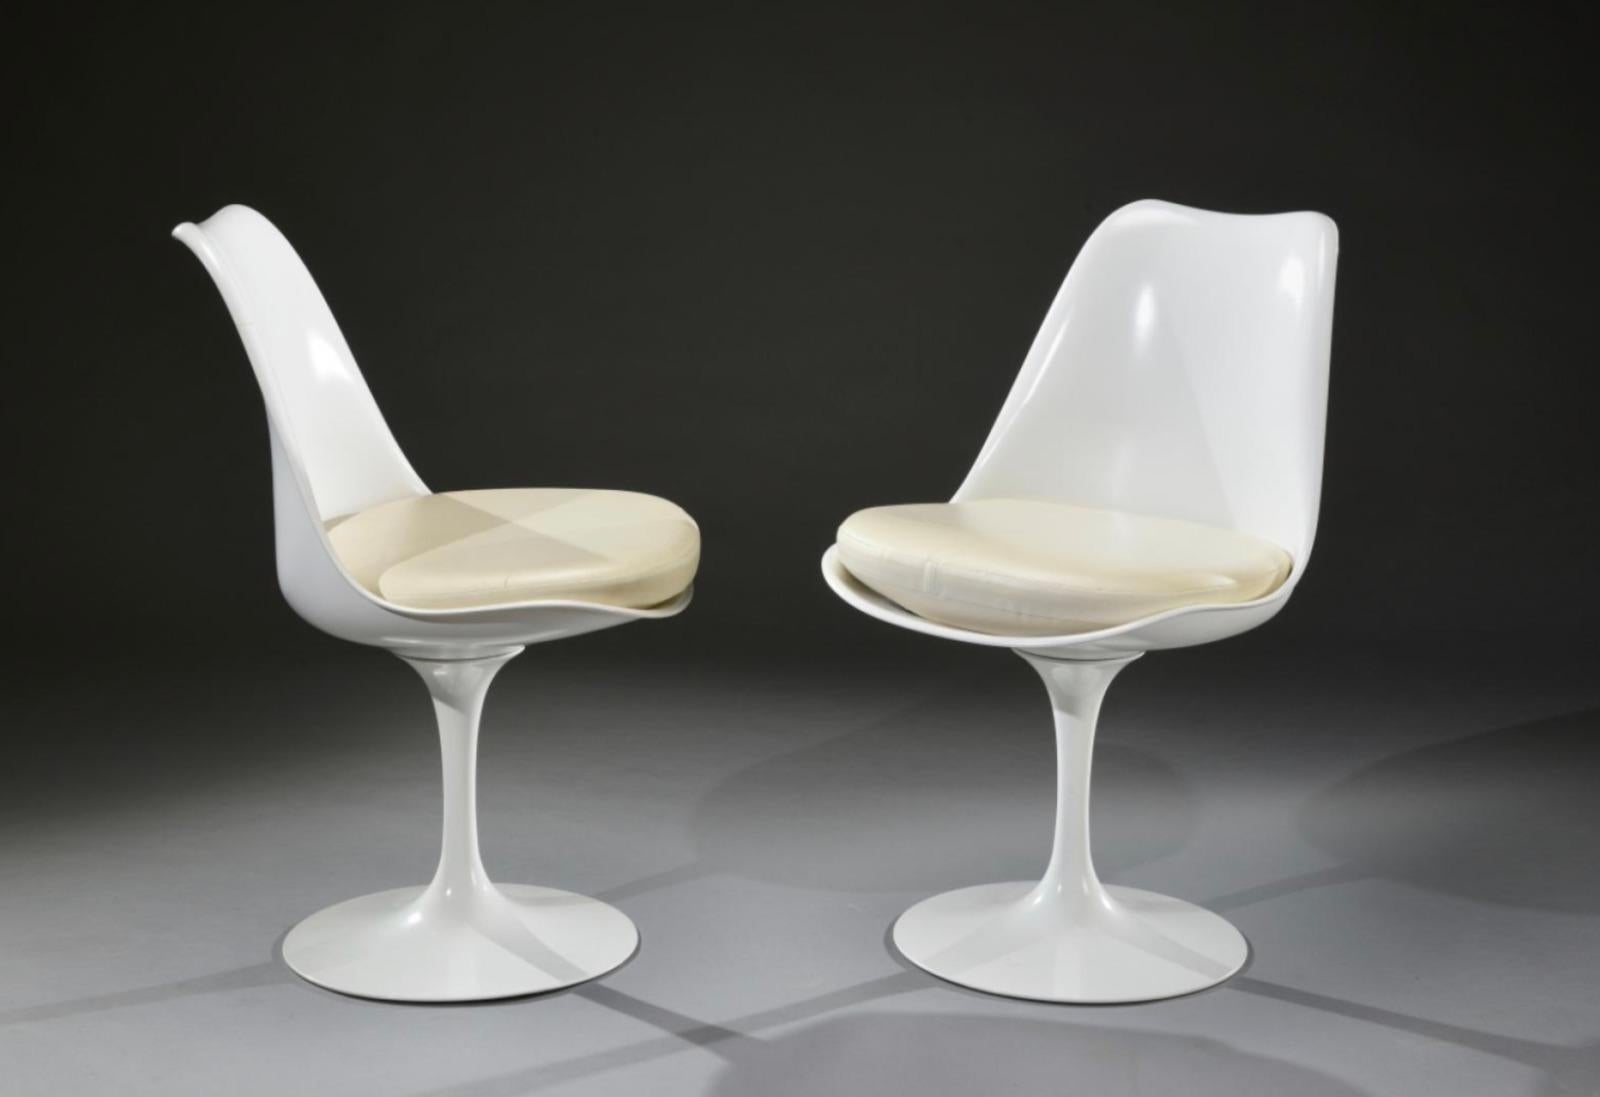 Eero Saarinen (1910-1961) & Knoll International

Pair of Tulip model chairs
Shell in white lacquered fiberglass, swivel base in cast aluminum covered with white Rilsan.
Patties in white synthetic leather.
Measures: 31.89 x 20.08 x 17.33 in

Paire de